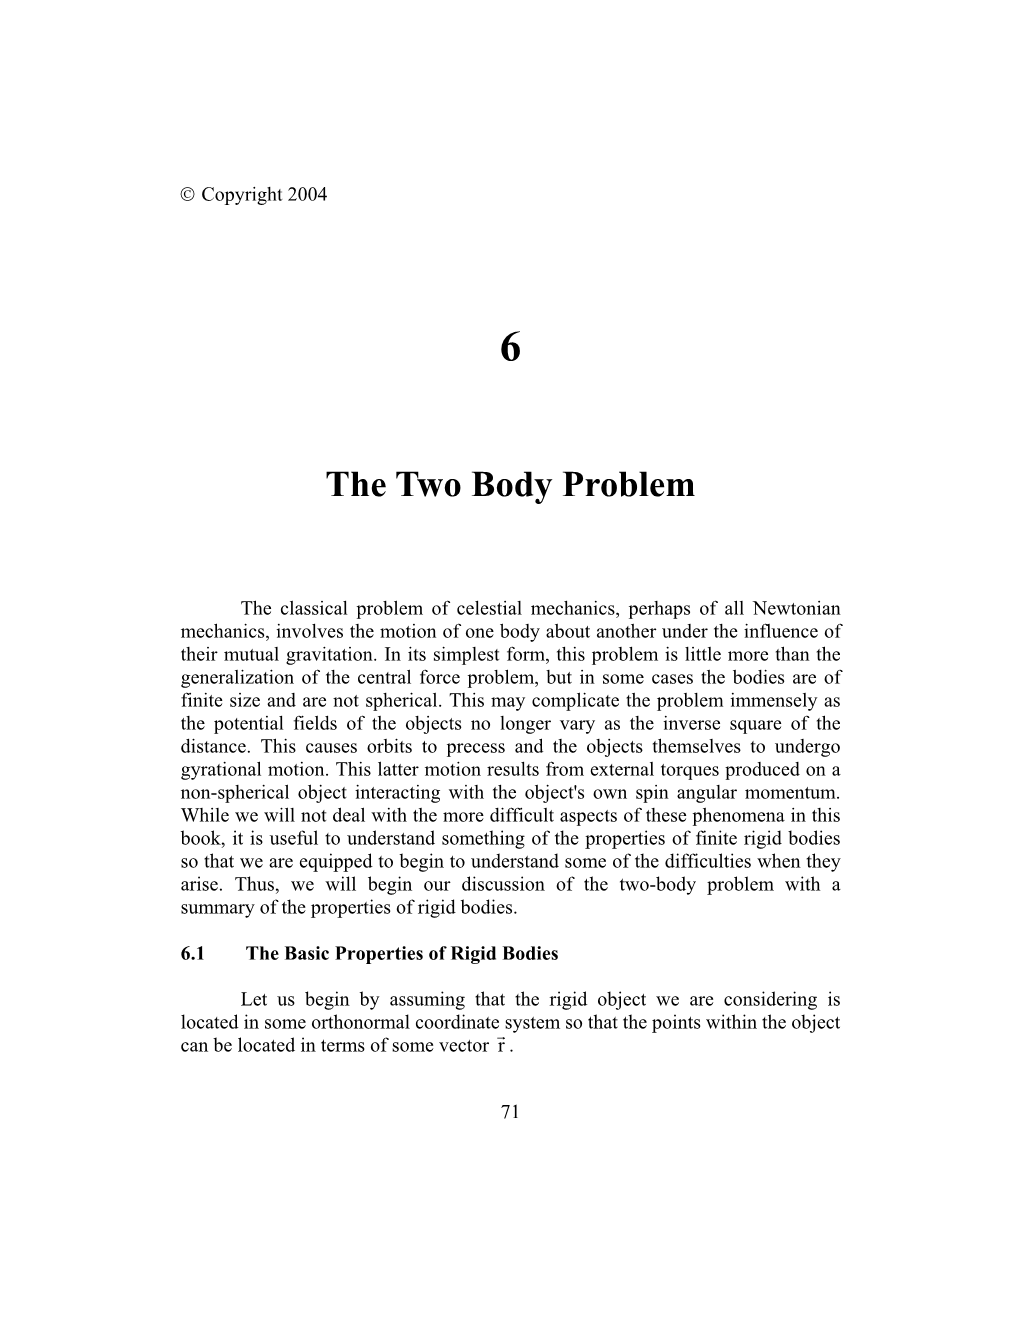 Chapter 6: the Two Body Problem